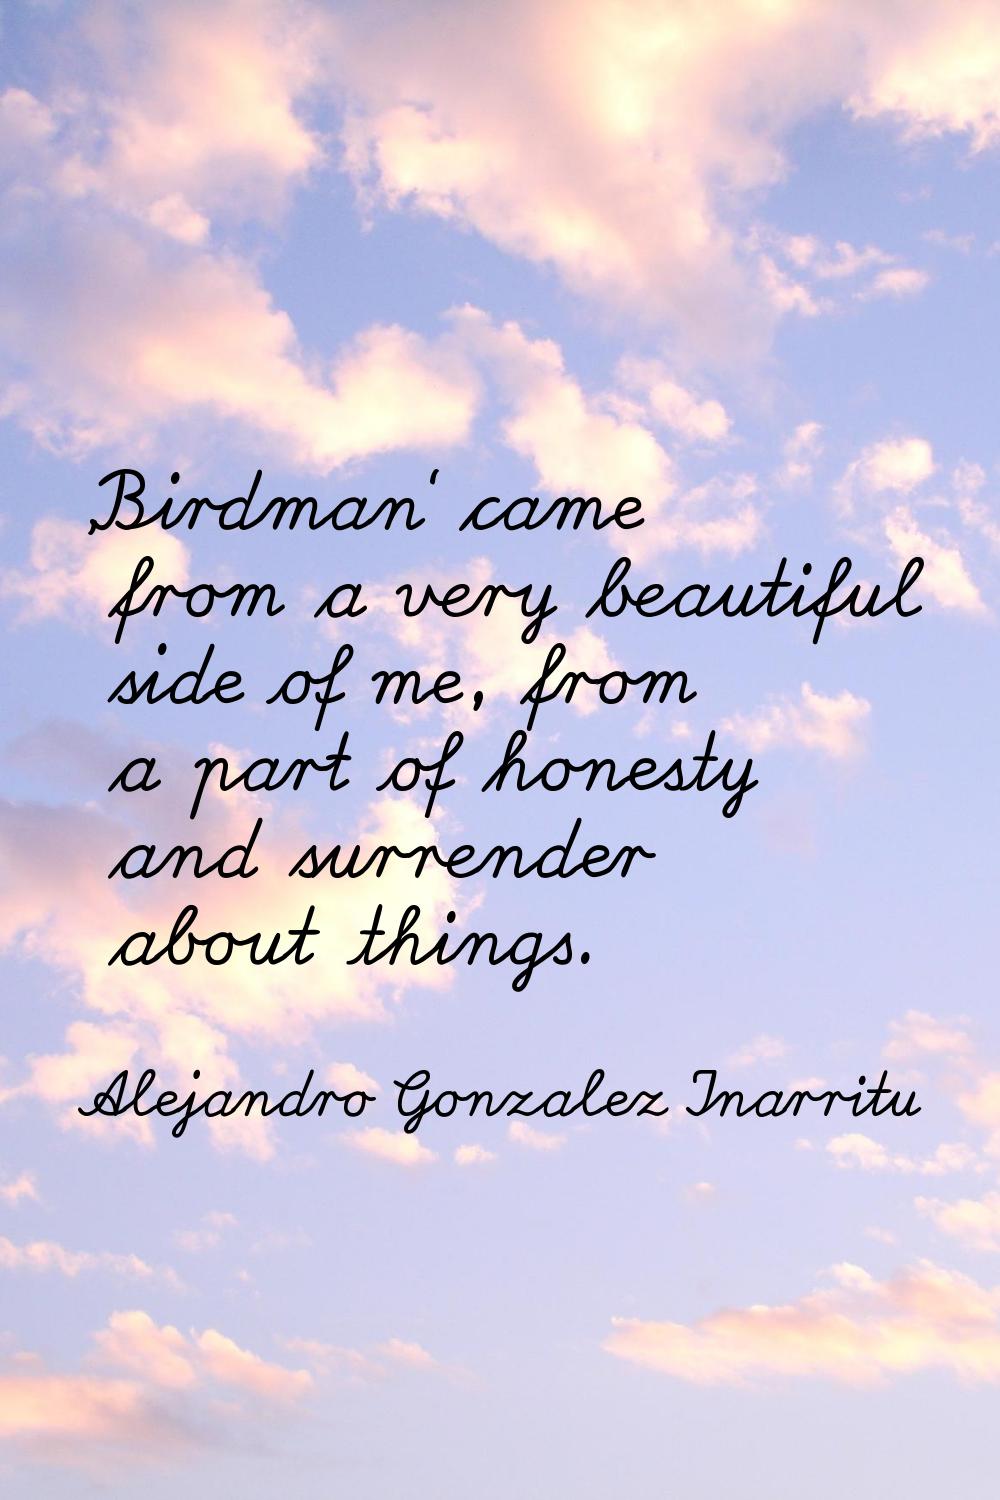 'Birdman' came from a very beautiful side of me, from a part of honesty and surrender about things.